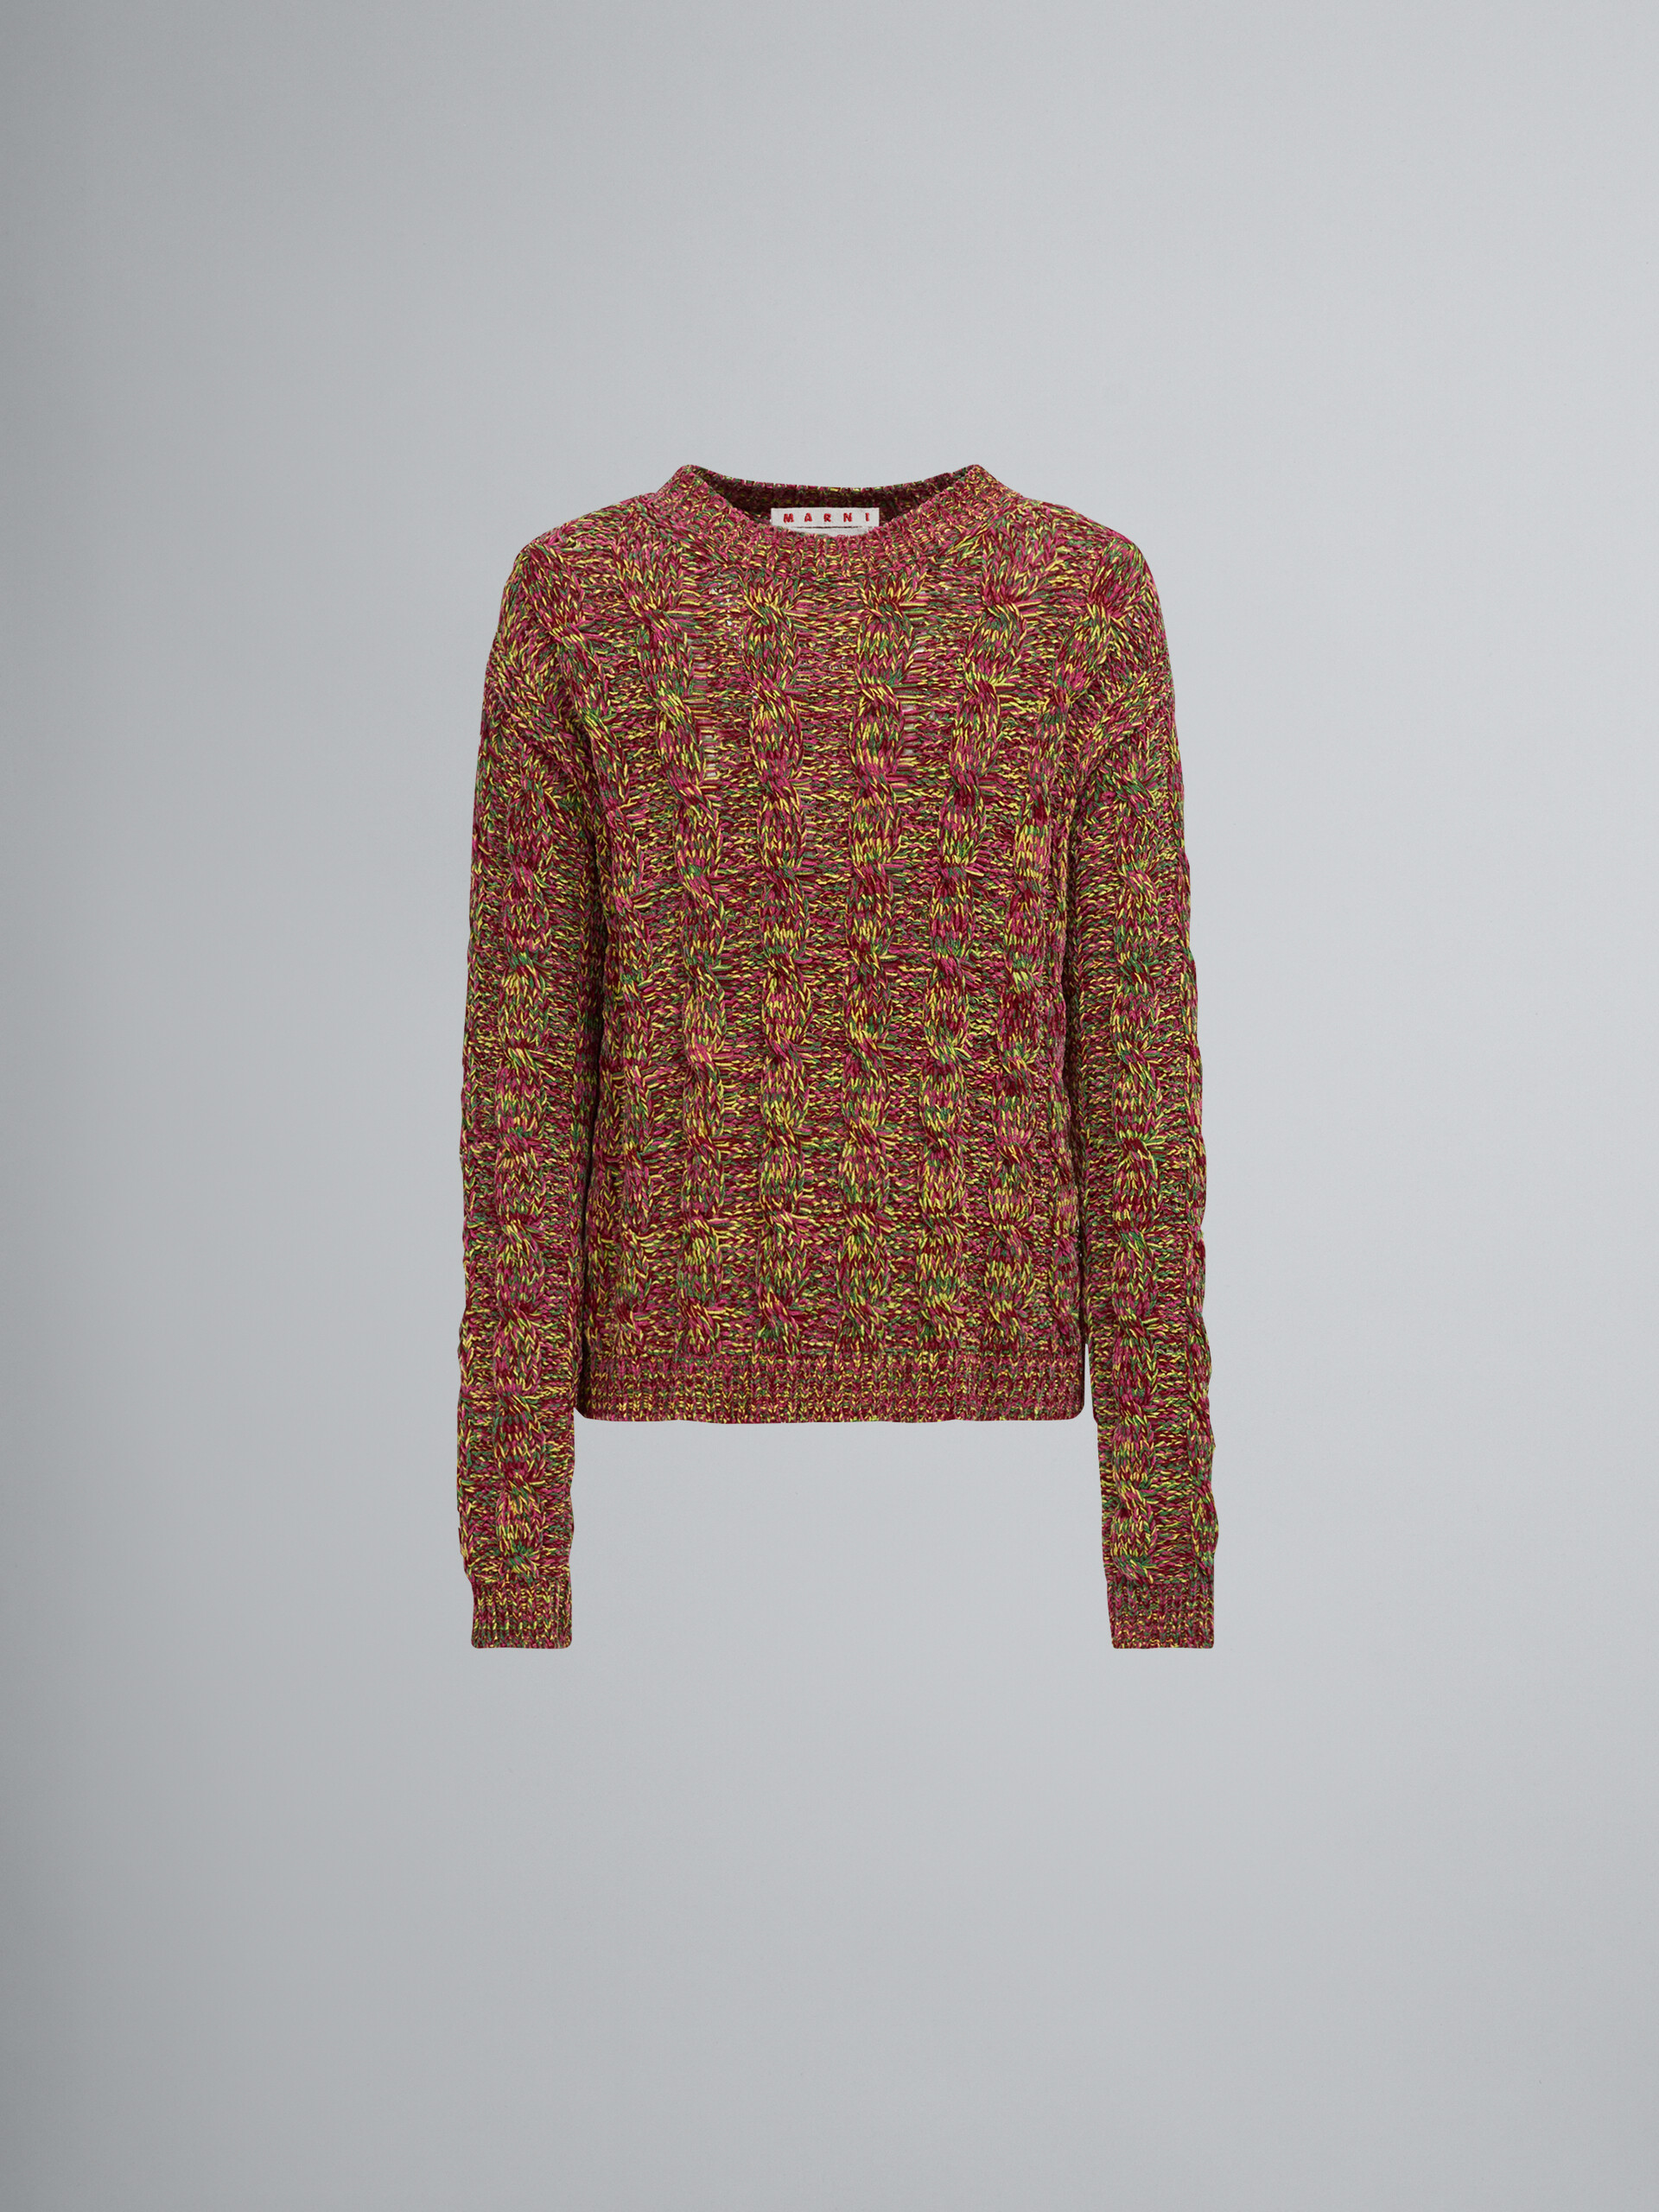 Viscose and cotton chenille crewneck sweater - Pullovers - Image 1